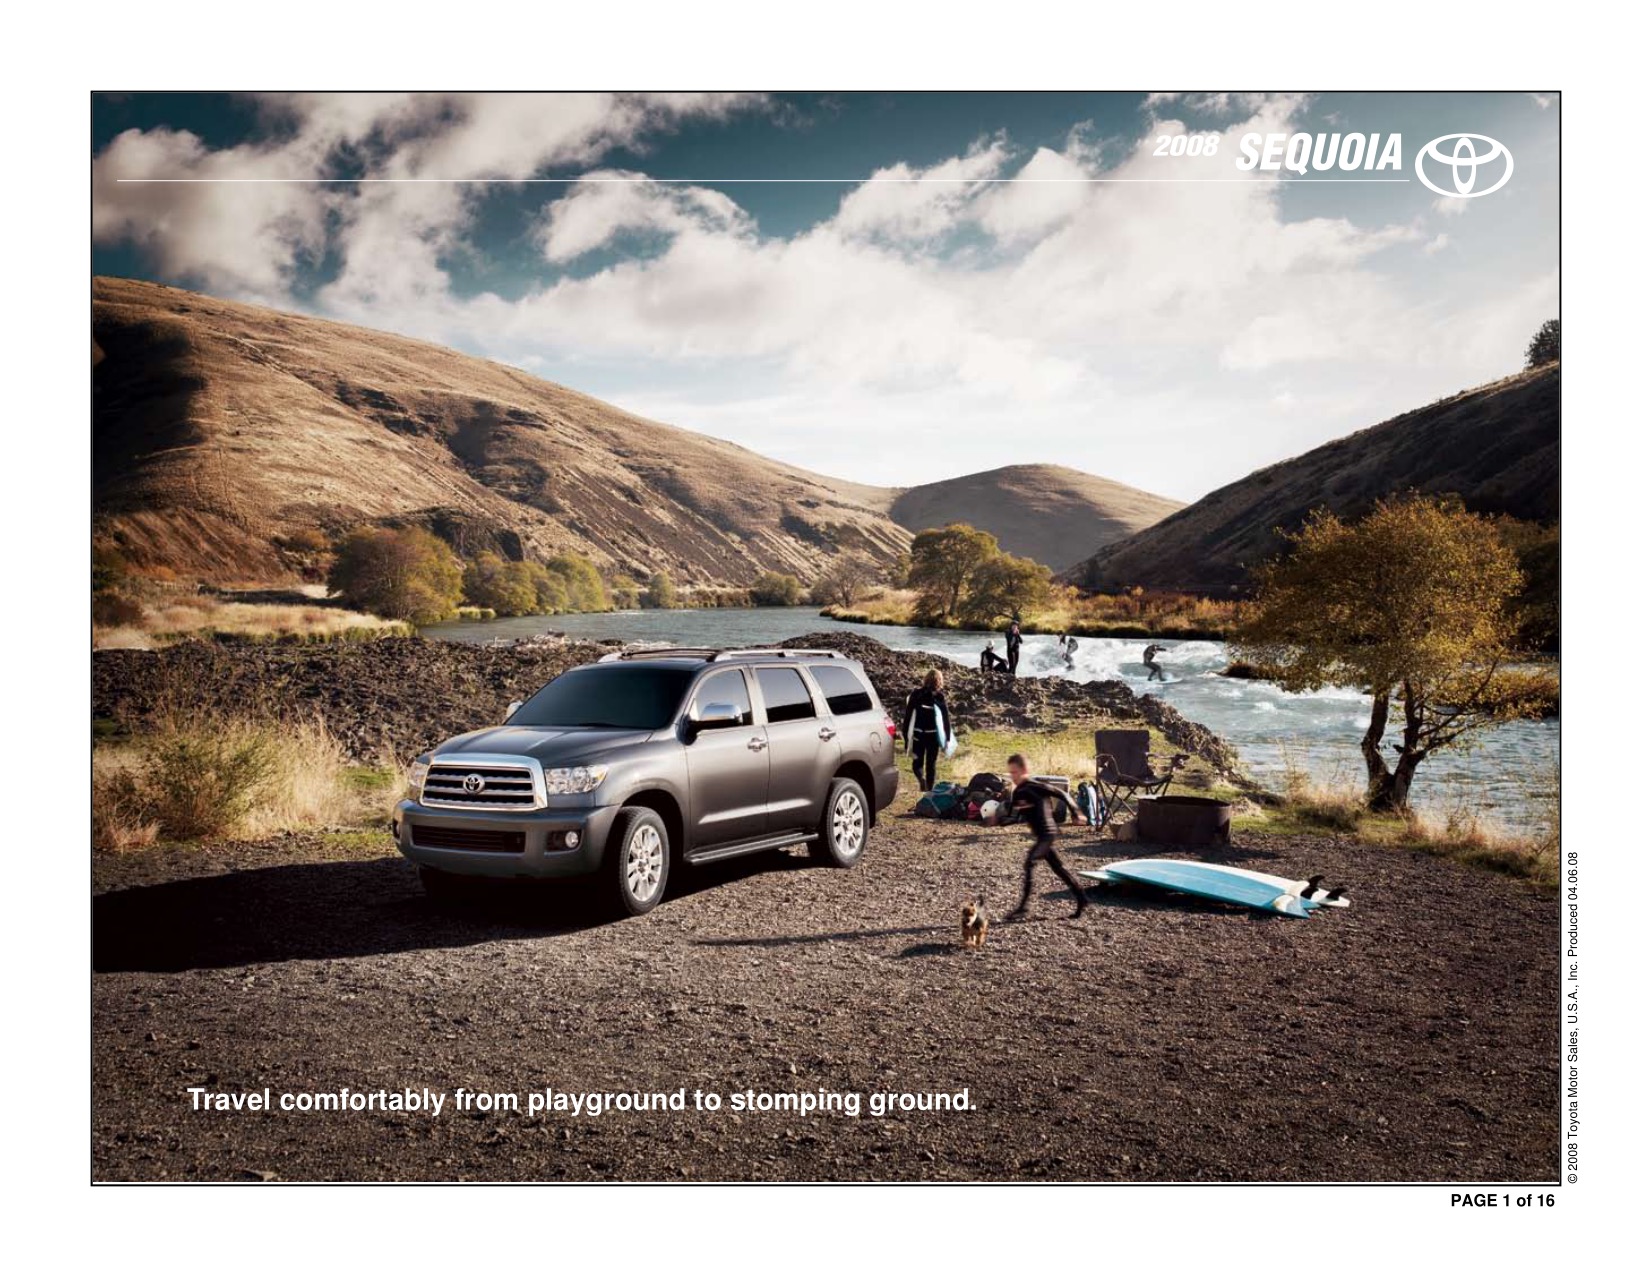 2009 Toyota Sequoia Brochure Page 16